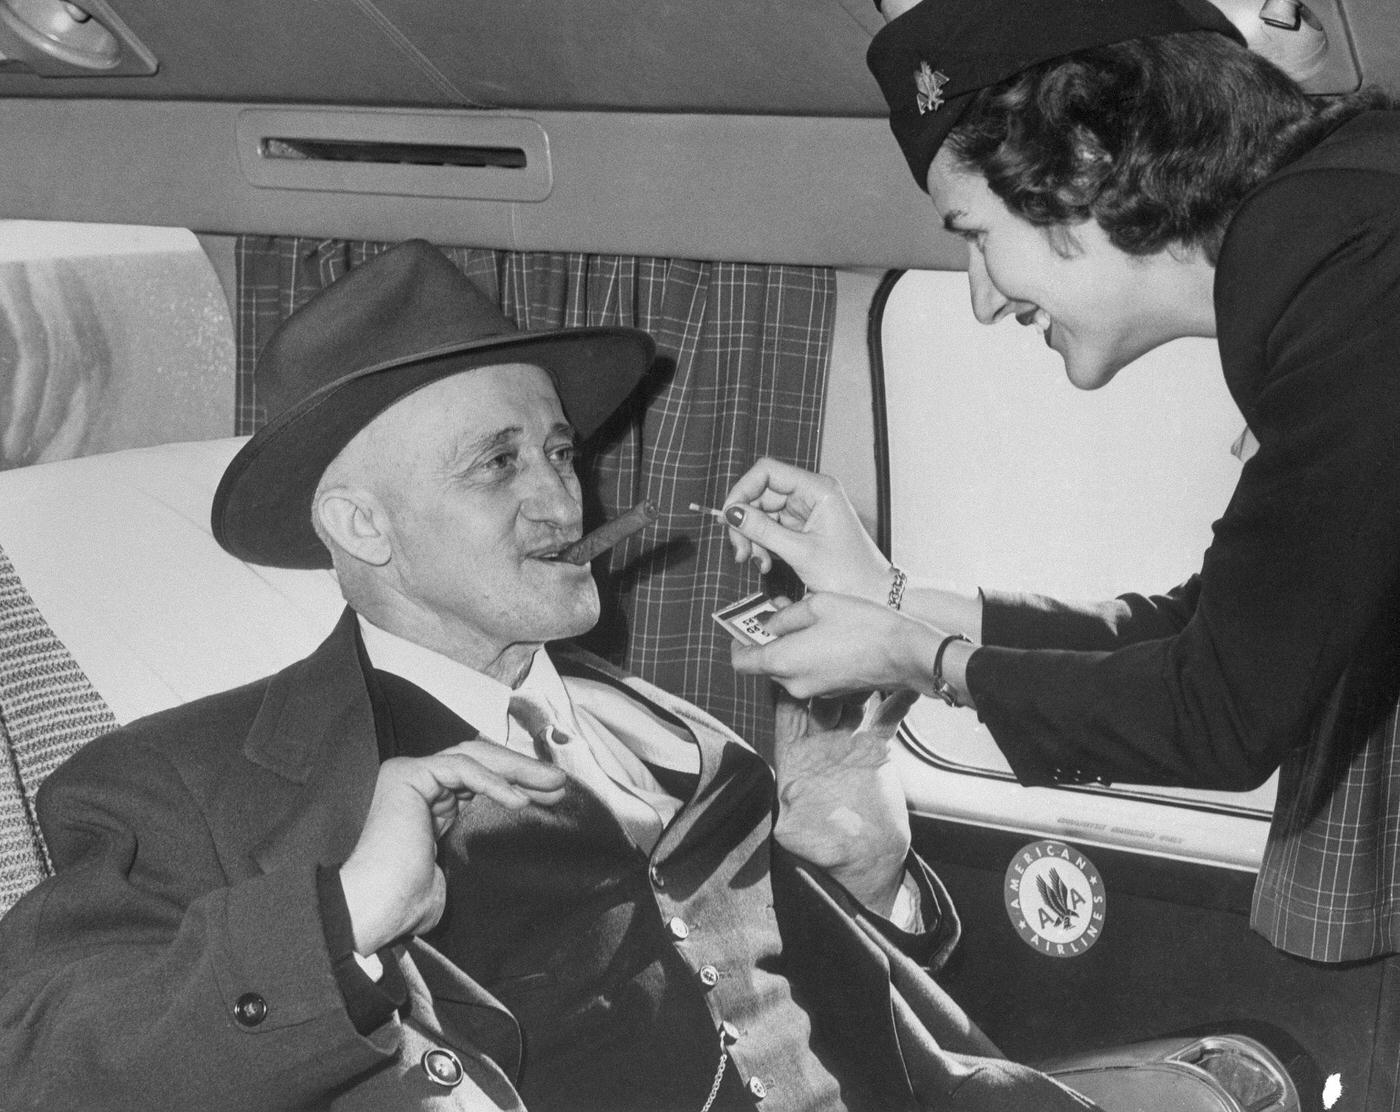 Stewardess Jane Driscoll lights a cigar for airline passenger Carl Graulein, 68, of East St. Louis, as he prepares to depart for his native Germany aboard an American Airlines overseas flight.